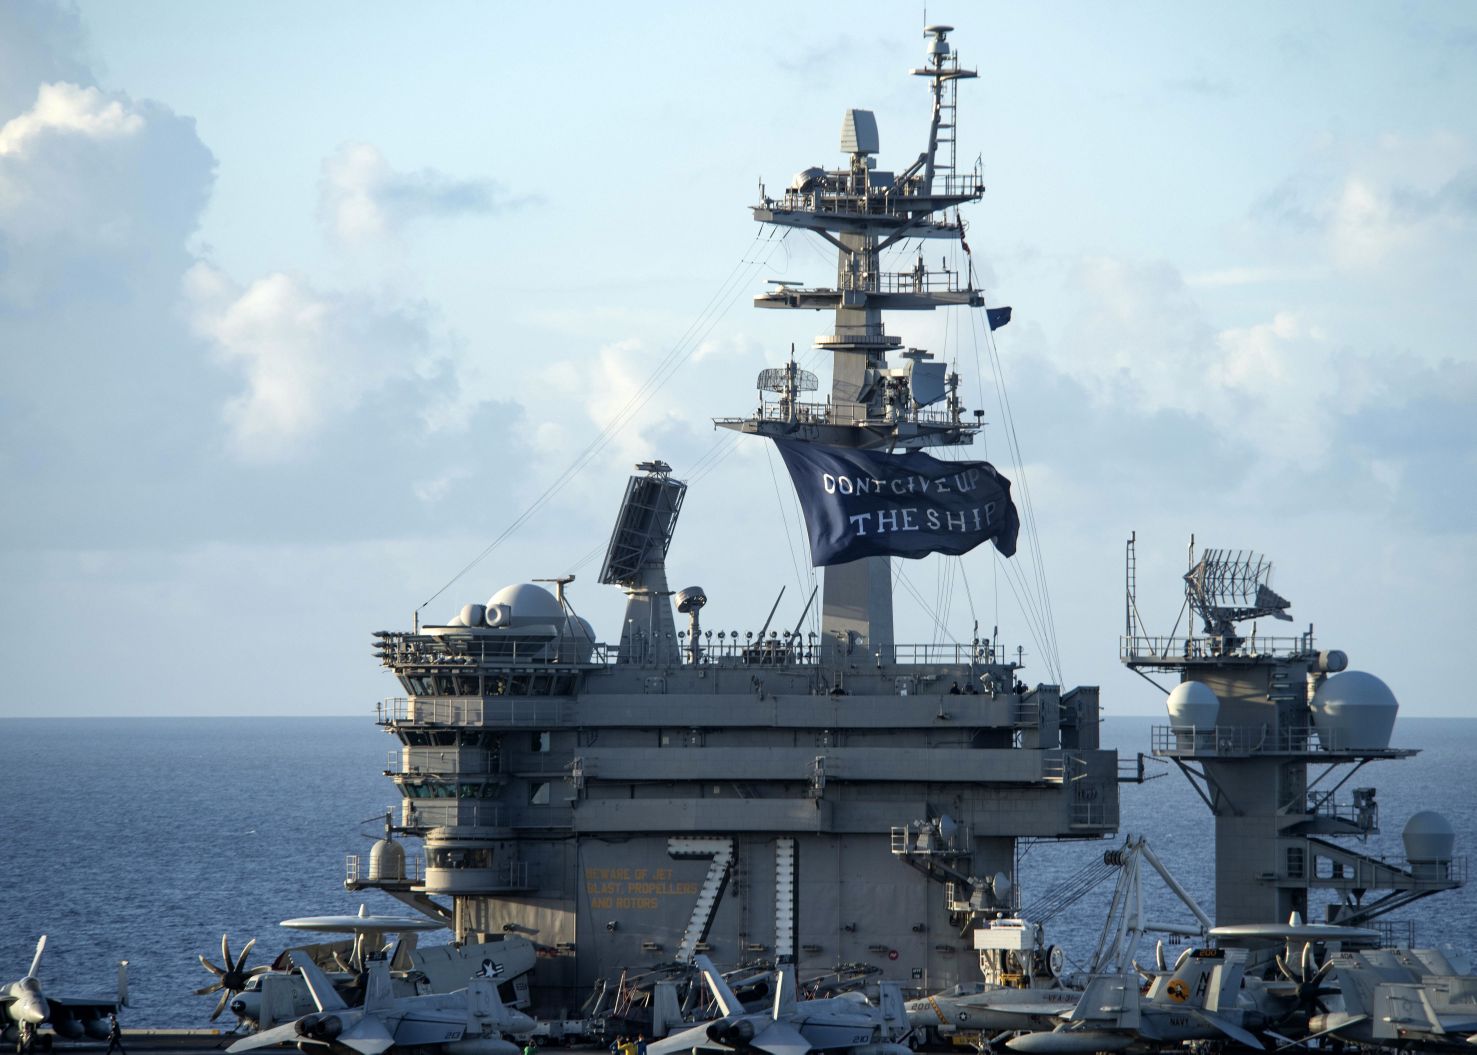 
        The aircraft carrier USS 
        Theodore Roosevelt
         (CVN 71) flies a ‘Don’t give up the ship’ flag as it gets underway following a Covid-19 outbreak. 
       (US Navy)